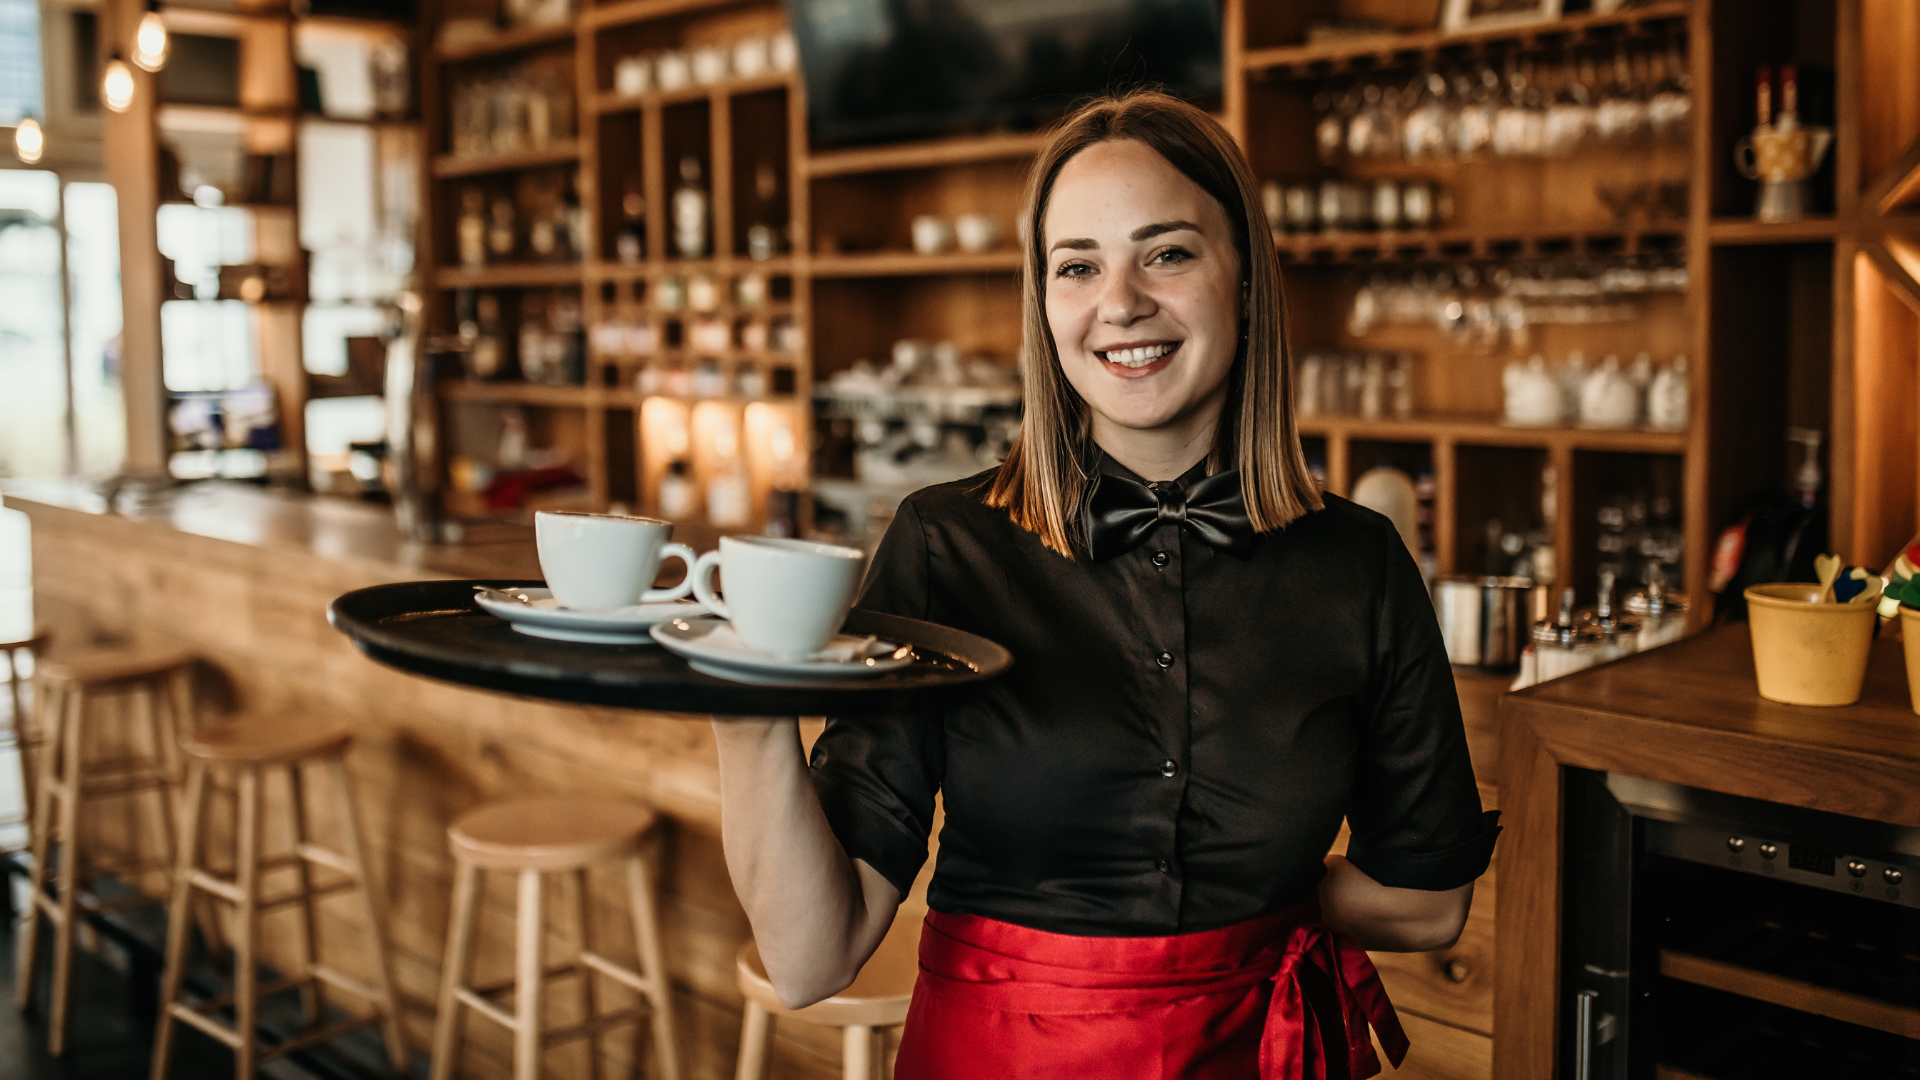 A Barista holding a serving tray with two cups of coffee on it